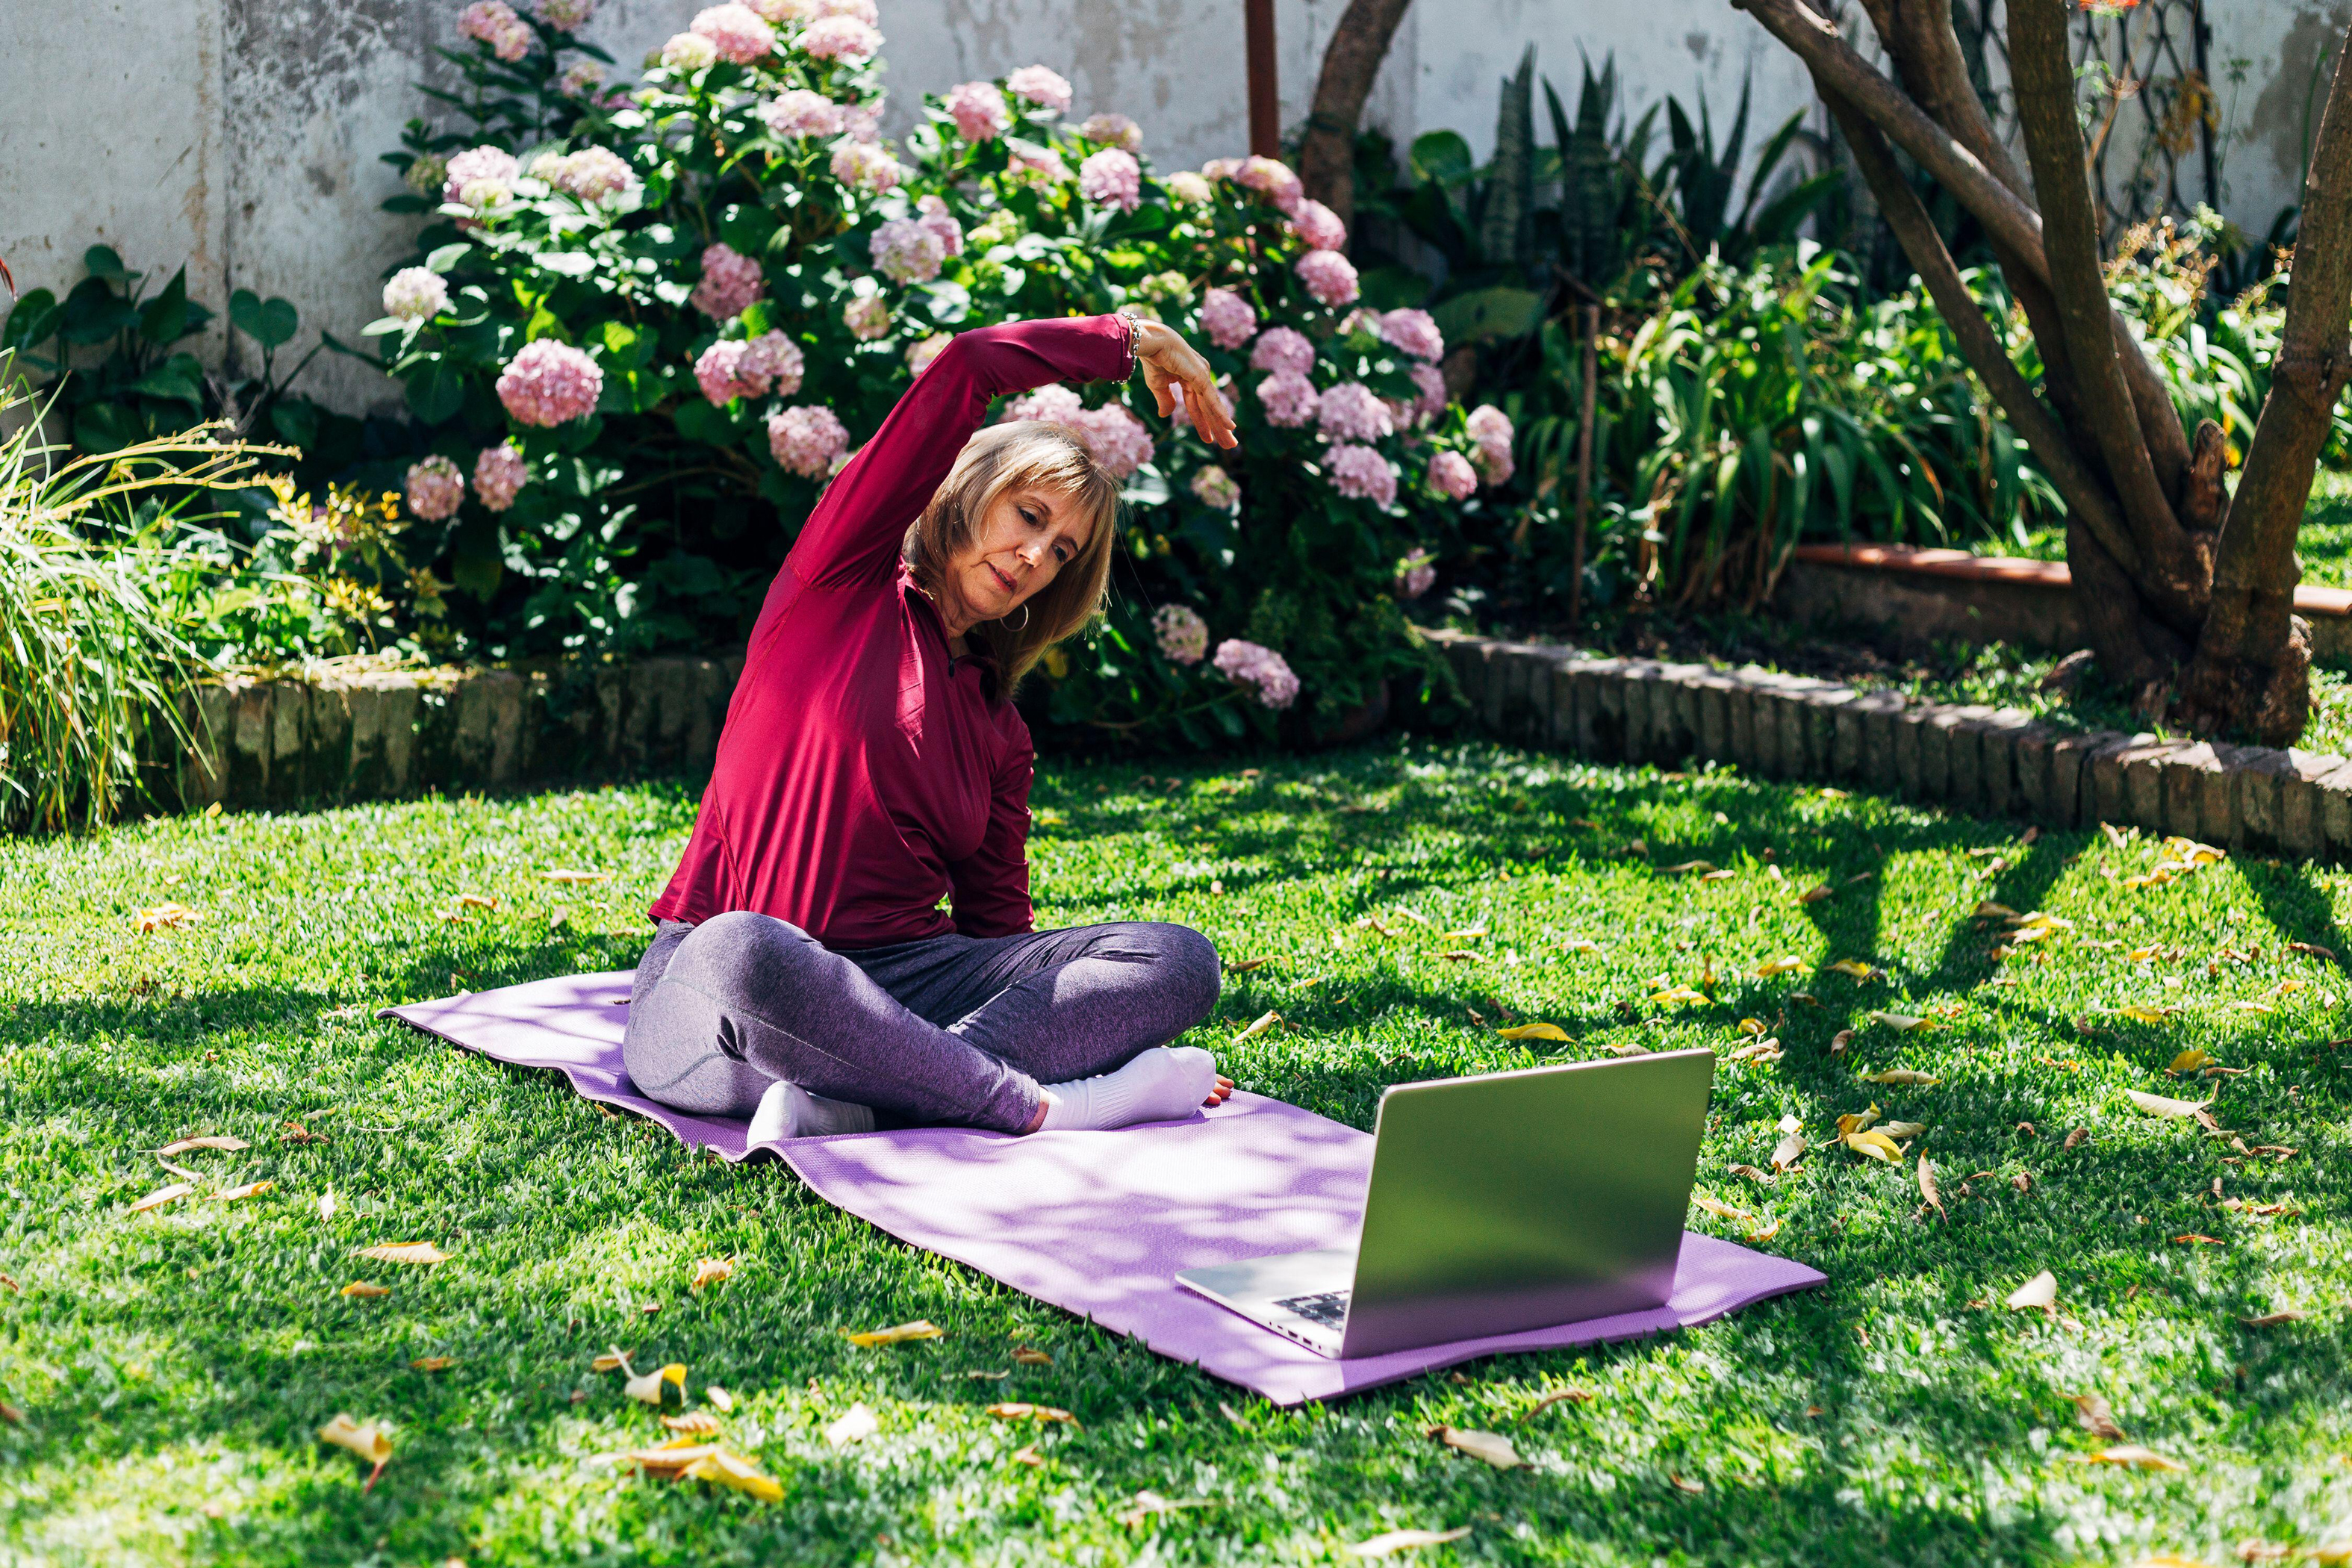 A woman stretching in the garden (Alamy/PA)